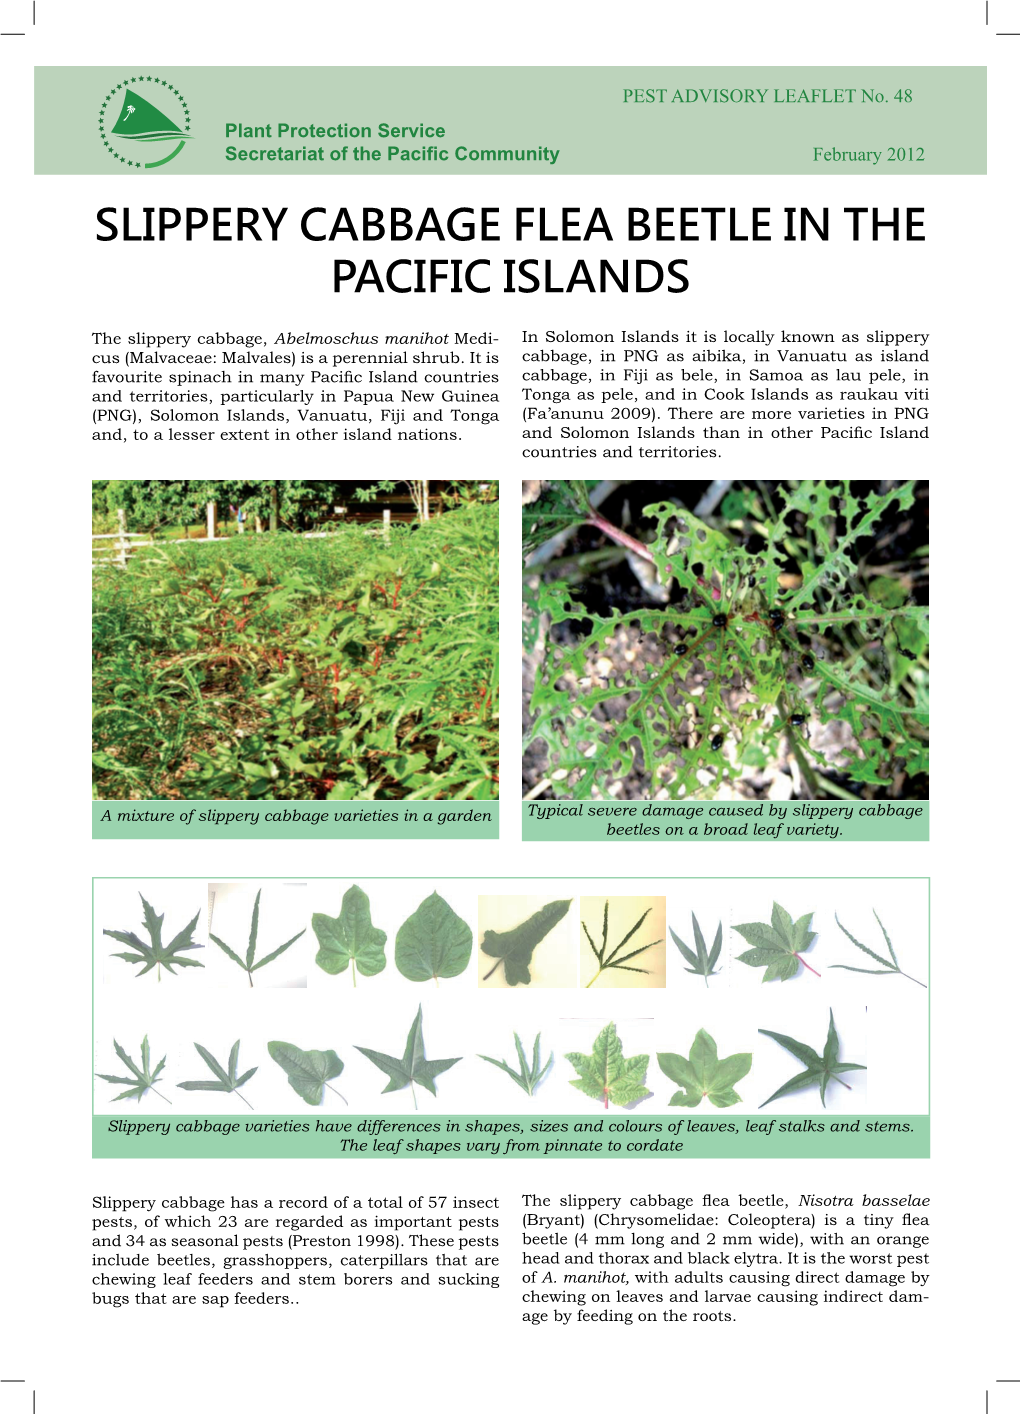 Slippery Cabbage Flea Beetle in the Pacific Islands